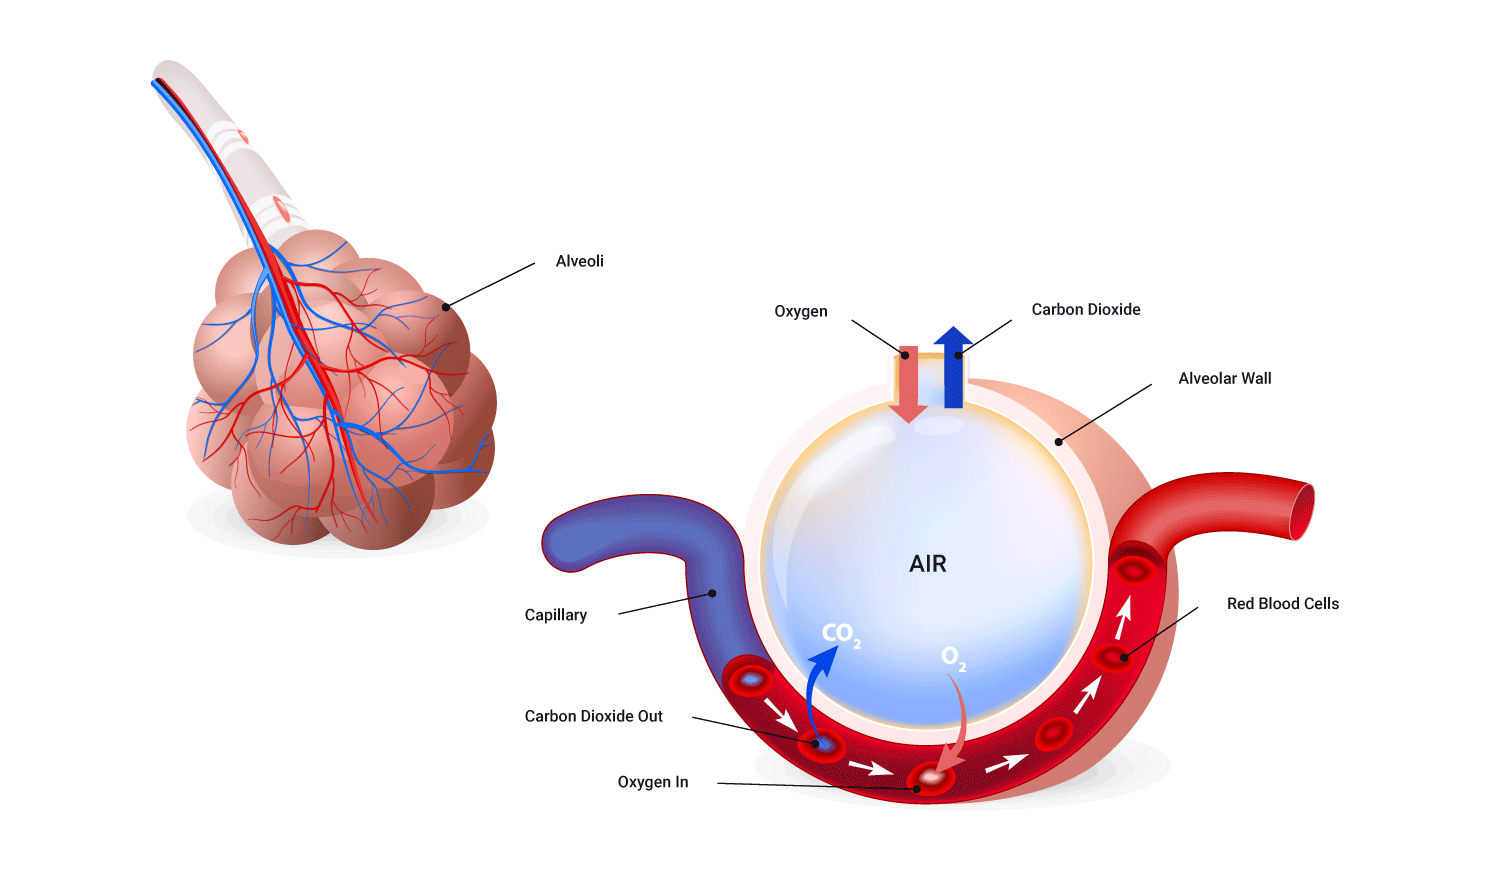 Image overviewing gas exchange in alveoli